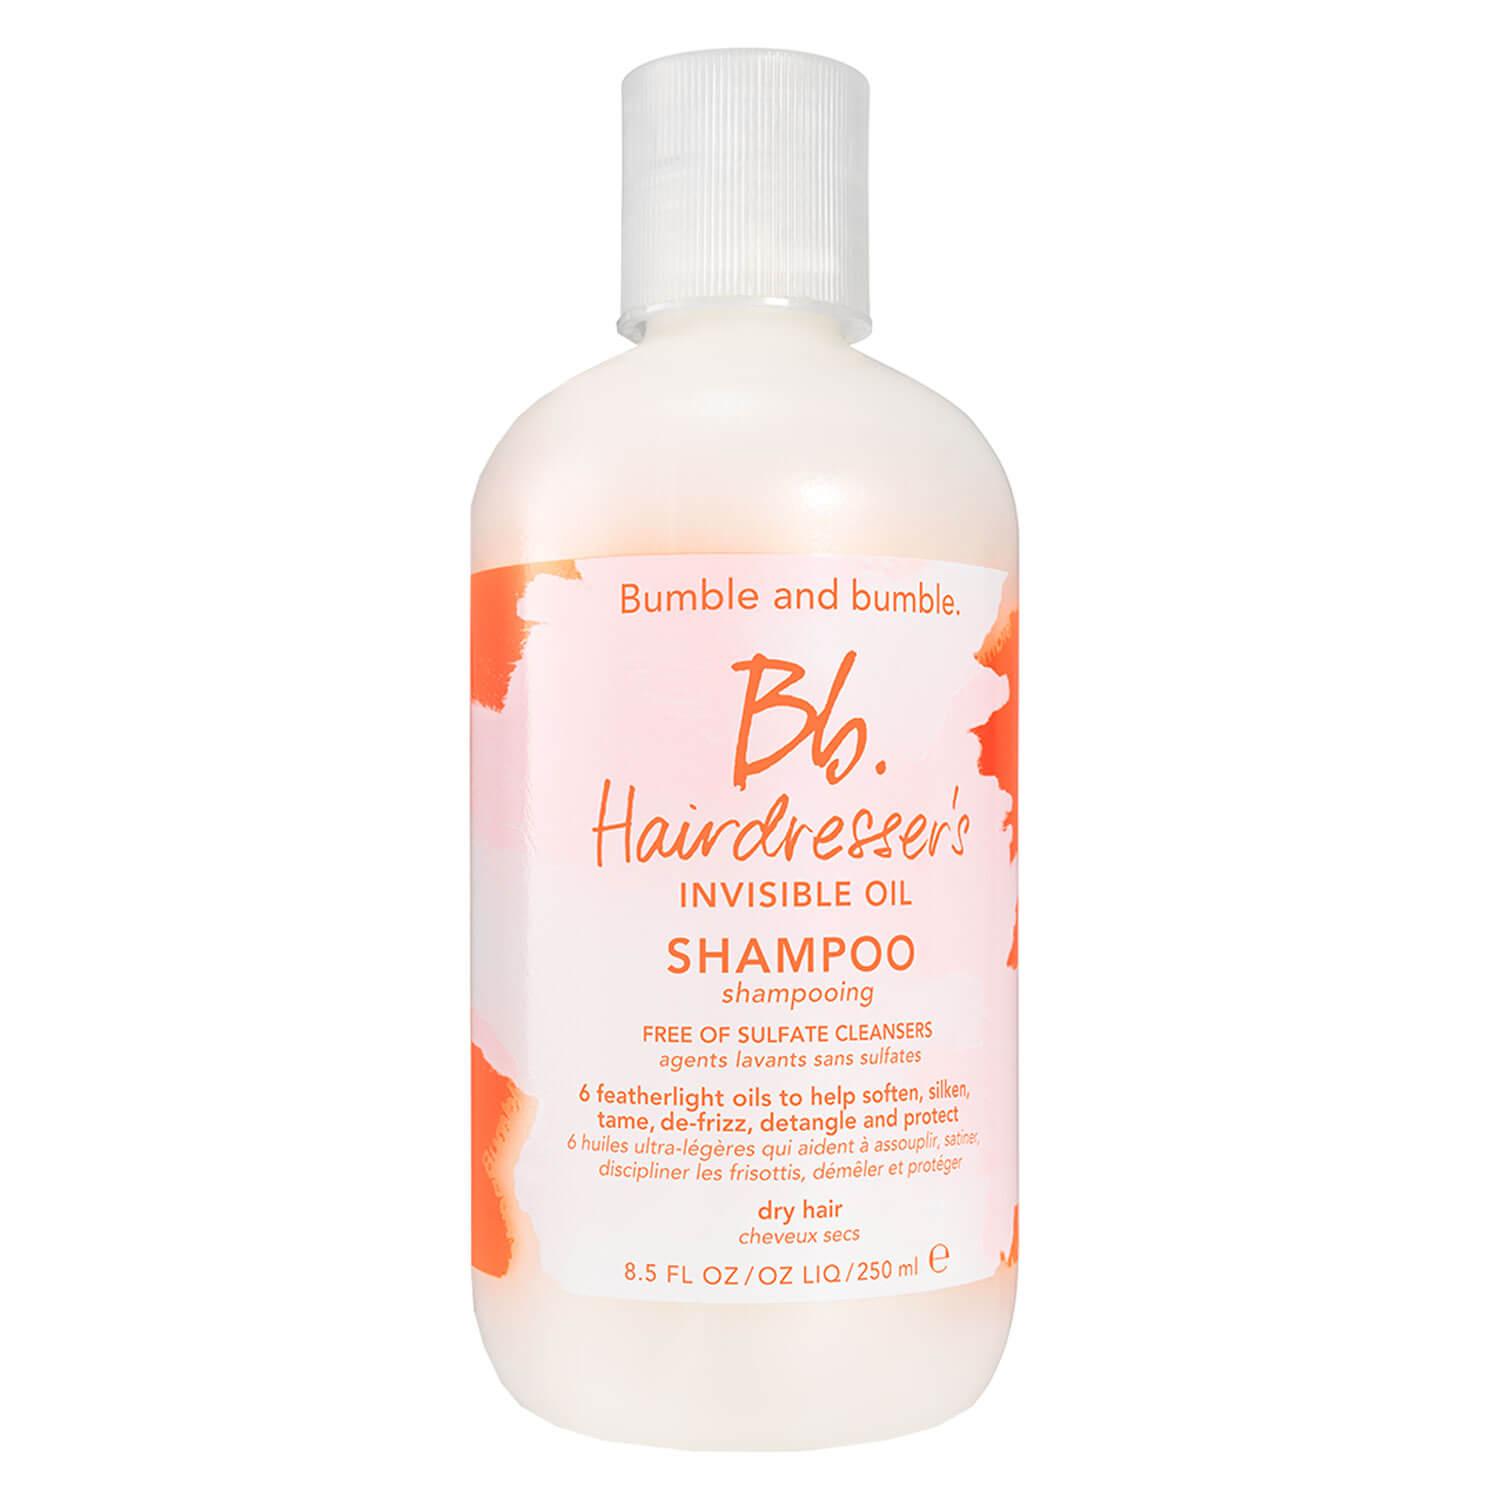 Bb. Hairdresser's Invisible Oil - Hairdresser's Invisible Oil Shampoo